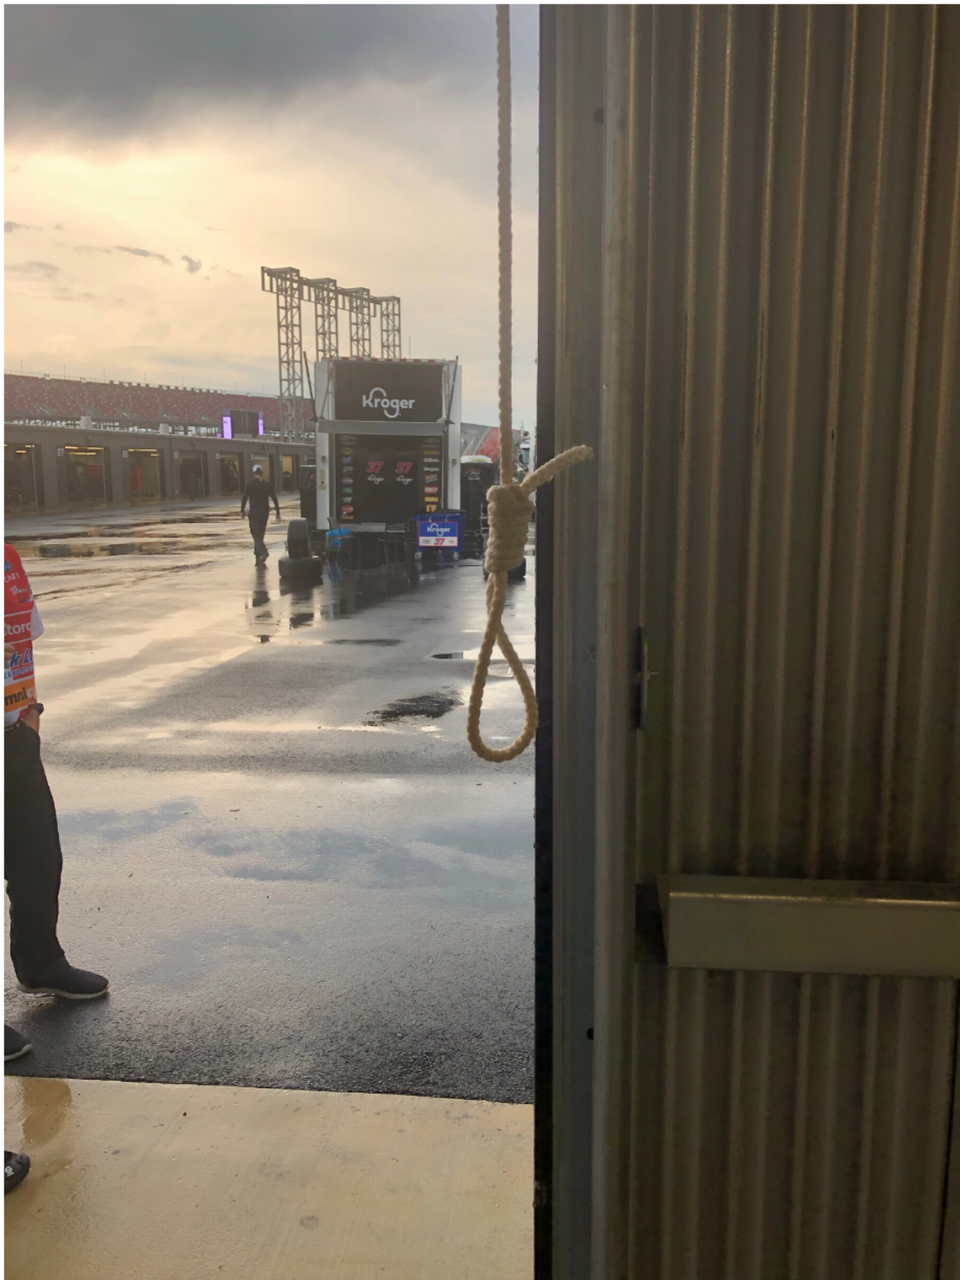 The FBI investigated a noose that was reported found in NASCAR driver Bubba Wallace’s garage stall last weekend at Talladega Superspeedway. (Photo from NASCAR.)